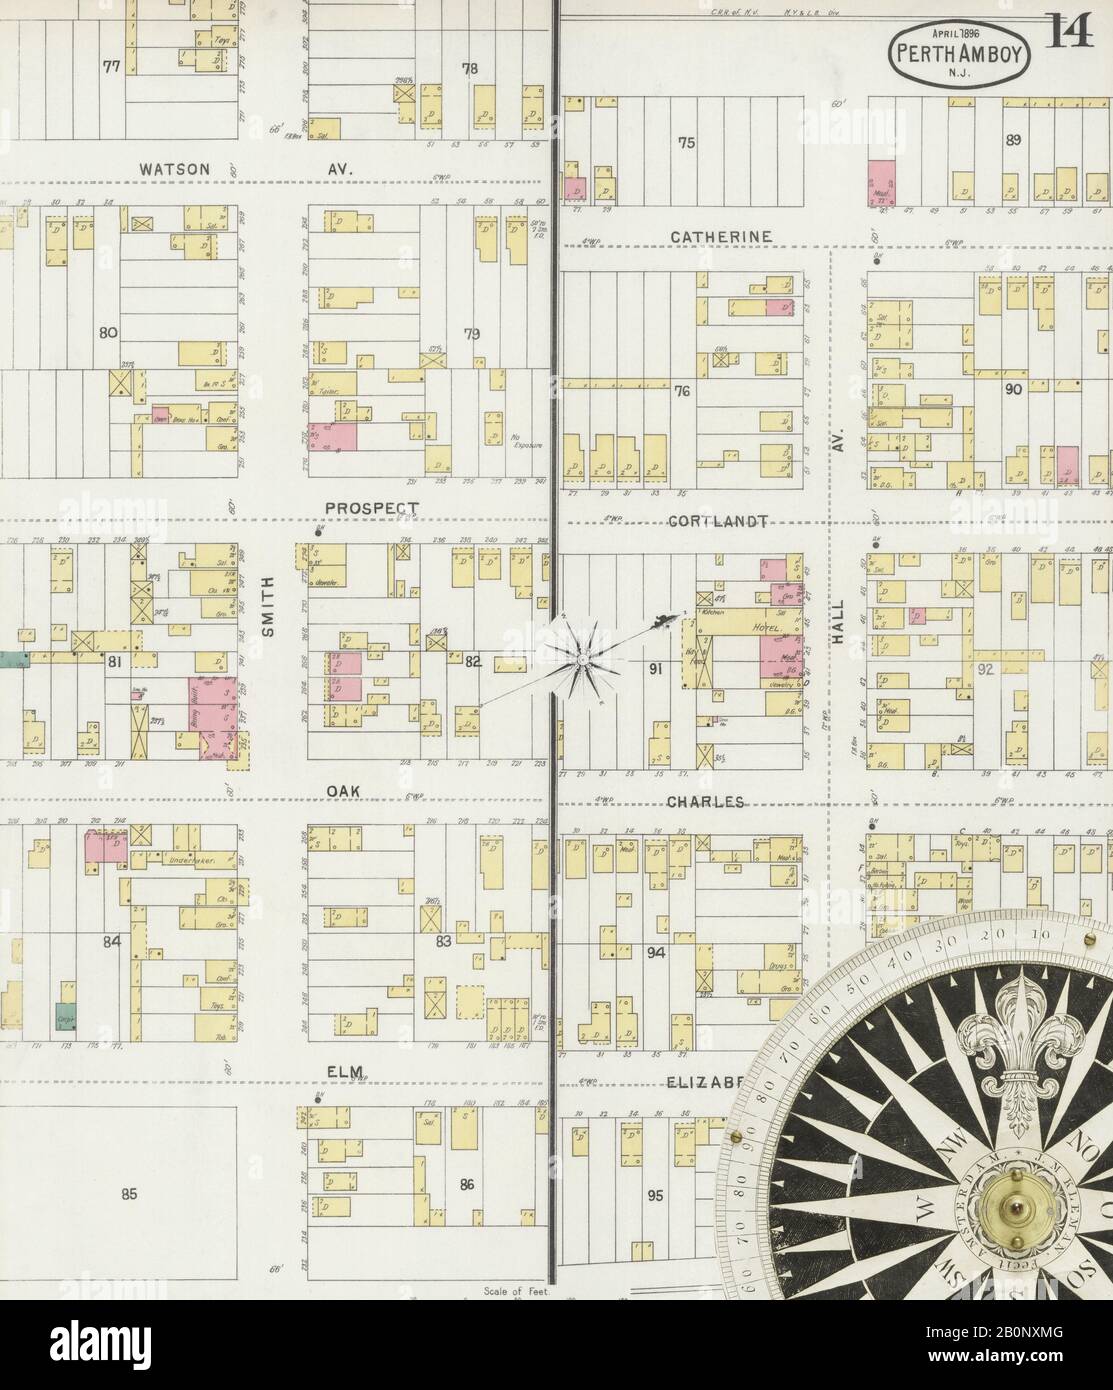 Image 14 of Sanborn Fire Insurance Map from Perth Amboy, Middlesex County, New Jersey. Apr 1896. 14 Sheet(s), America, street map with a Nineteenth Century compass Stock Photo